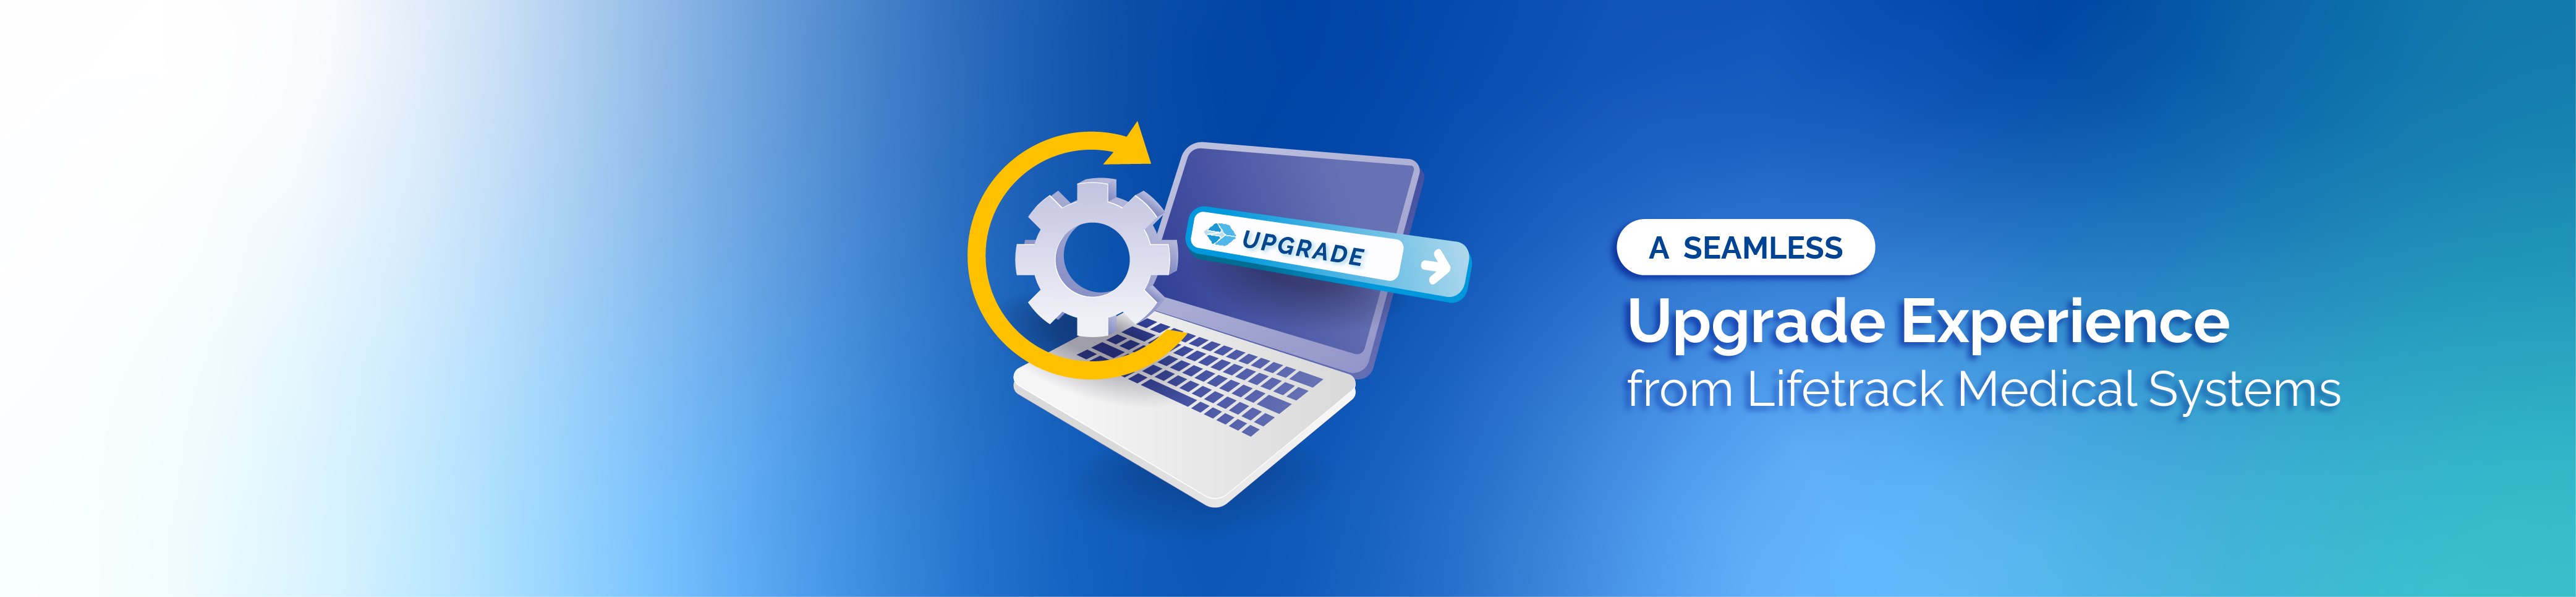 A Seamless Upgrade Experience from Lifetrack